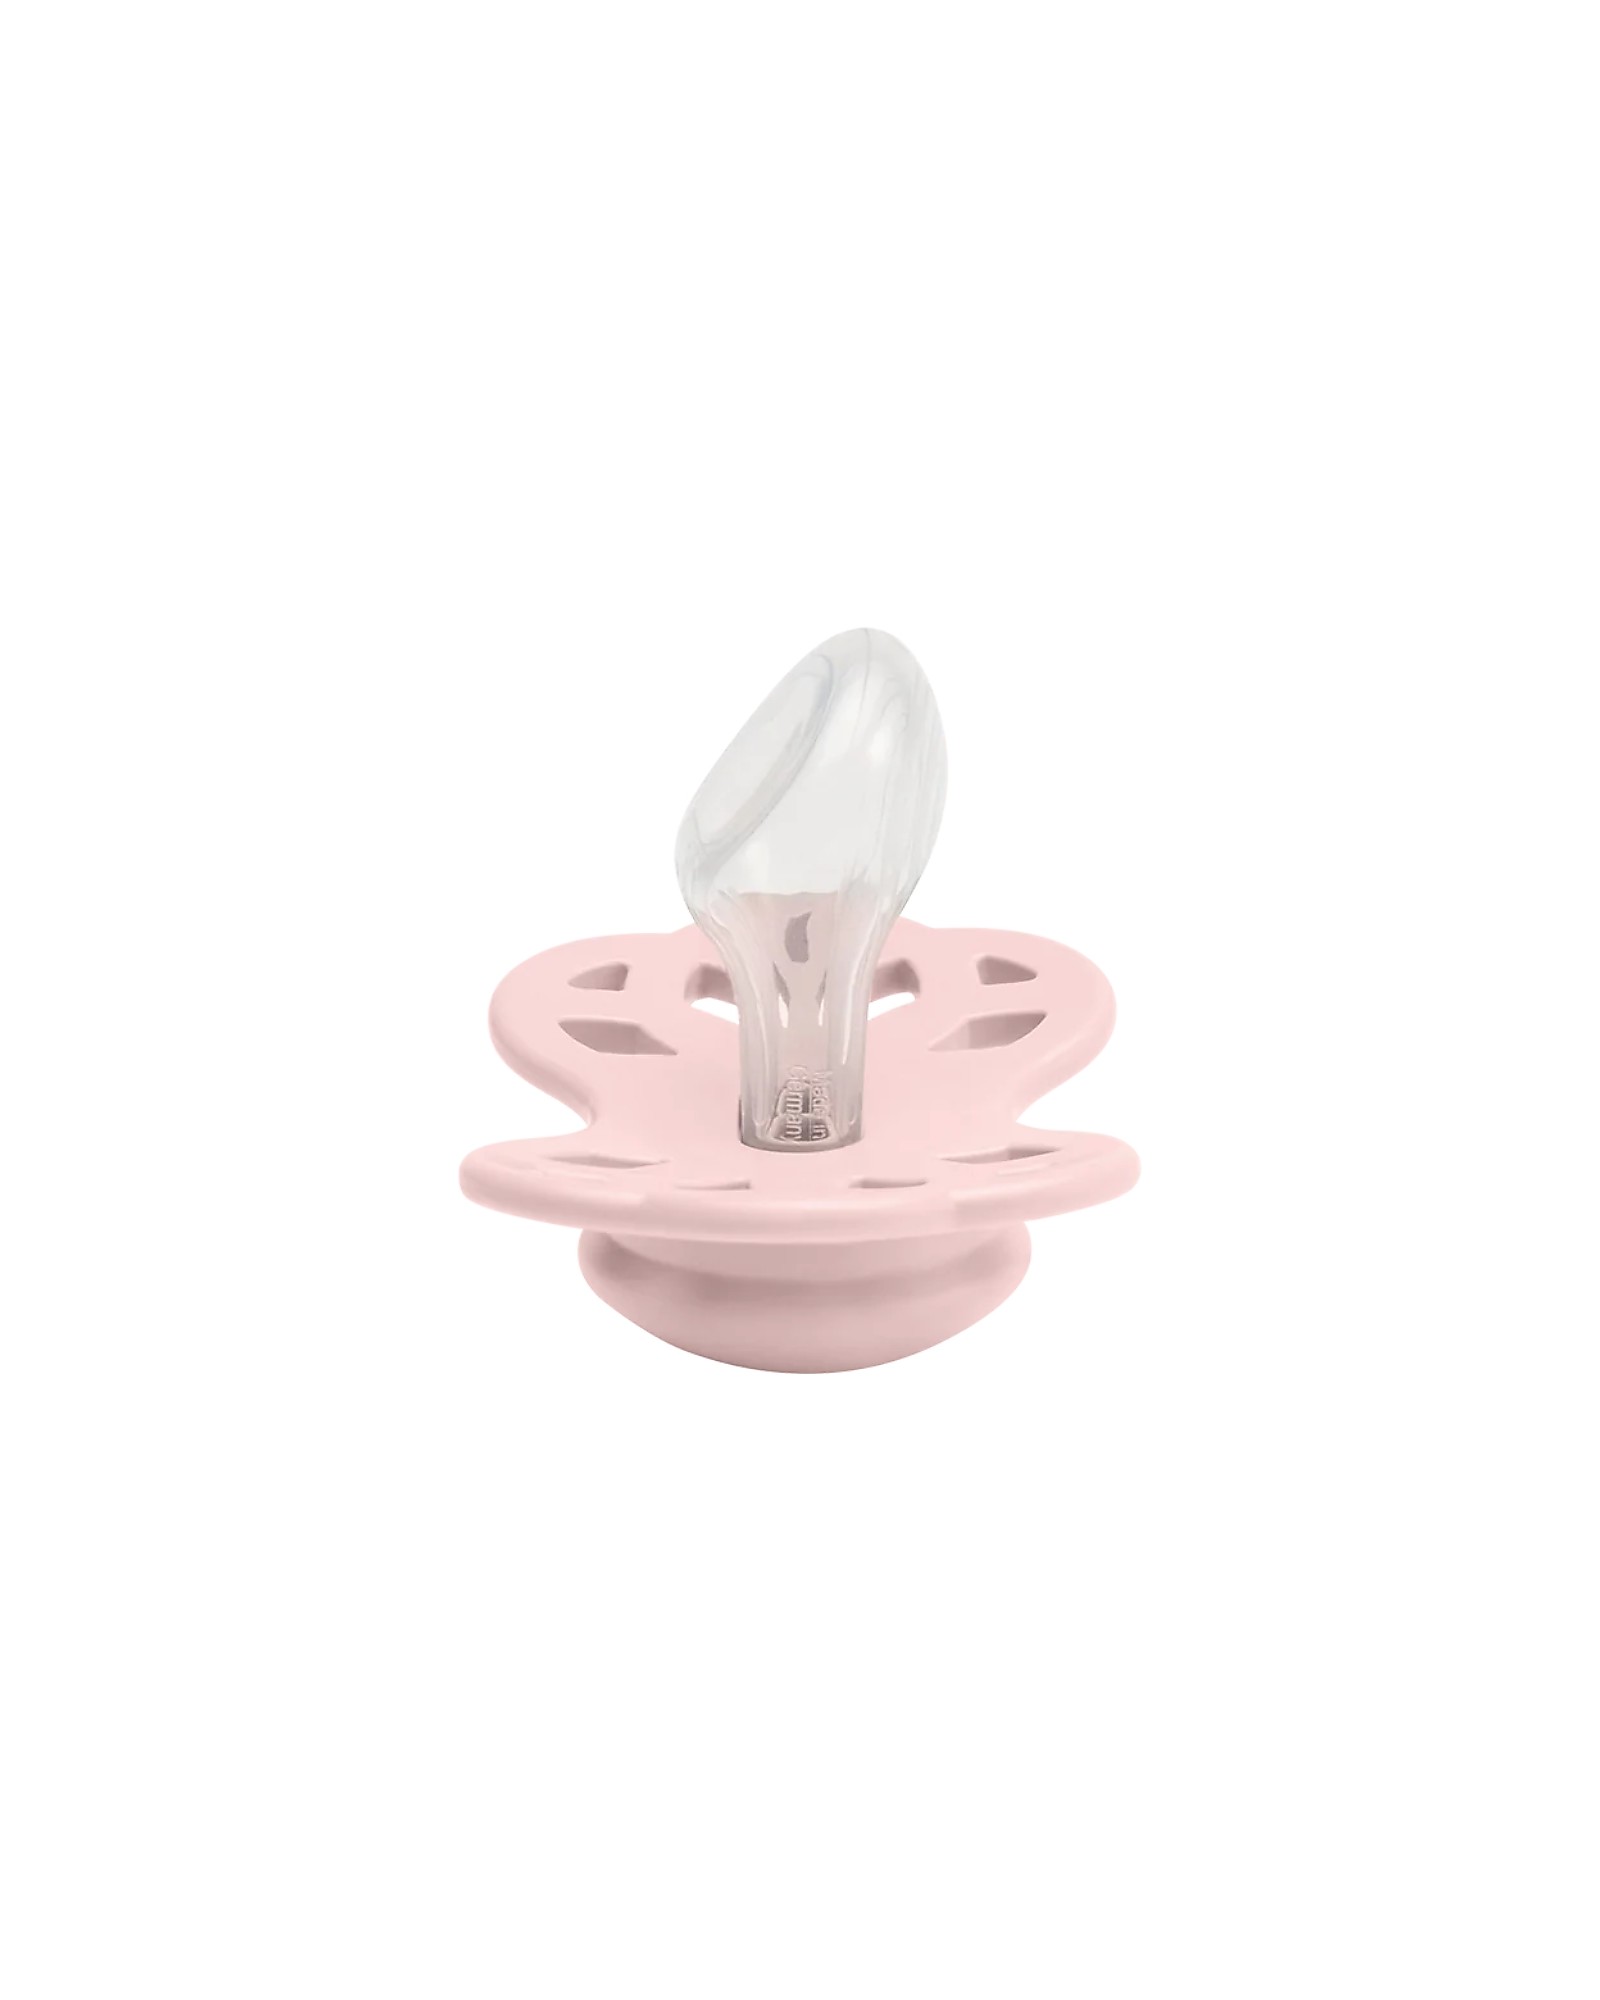 https://data.family-nation.com/imgprodotto/bibs-infinity-pacifier-anatomical-nipple-in-silicone-set-of-2-blossom-dusky-lilac-no-pba-and-pvc-dummies-&-soothers_456996_zoom.jpg